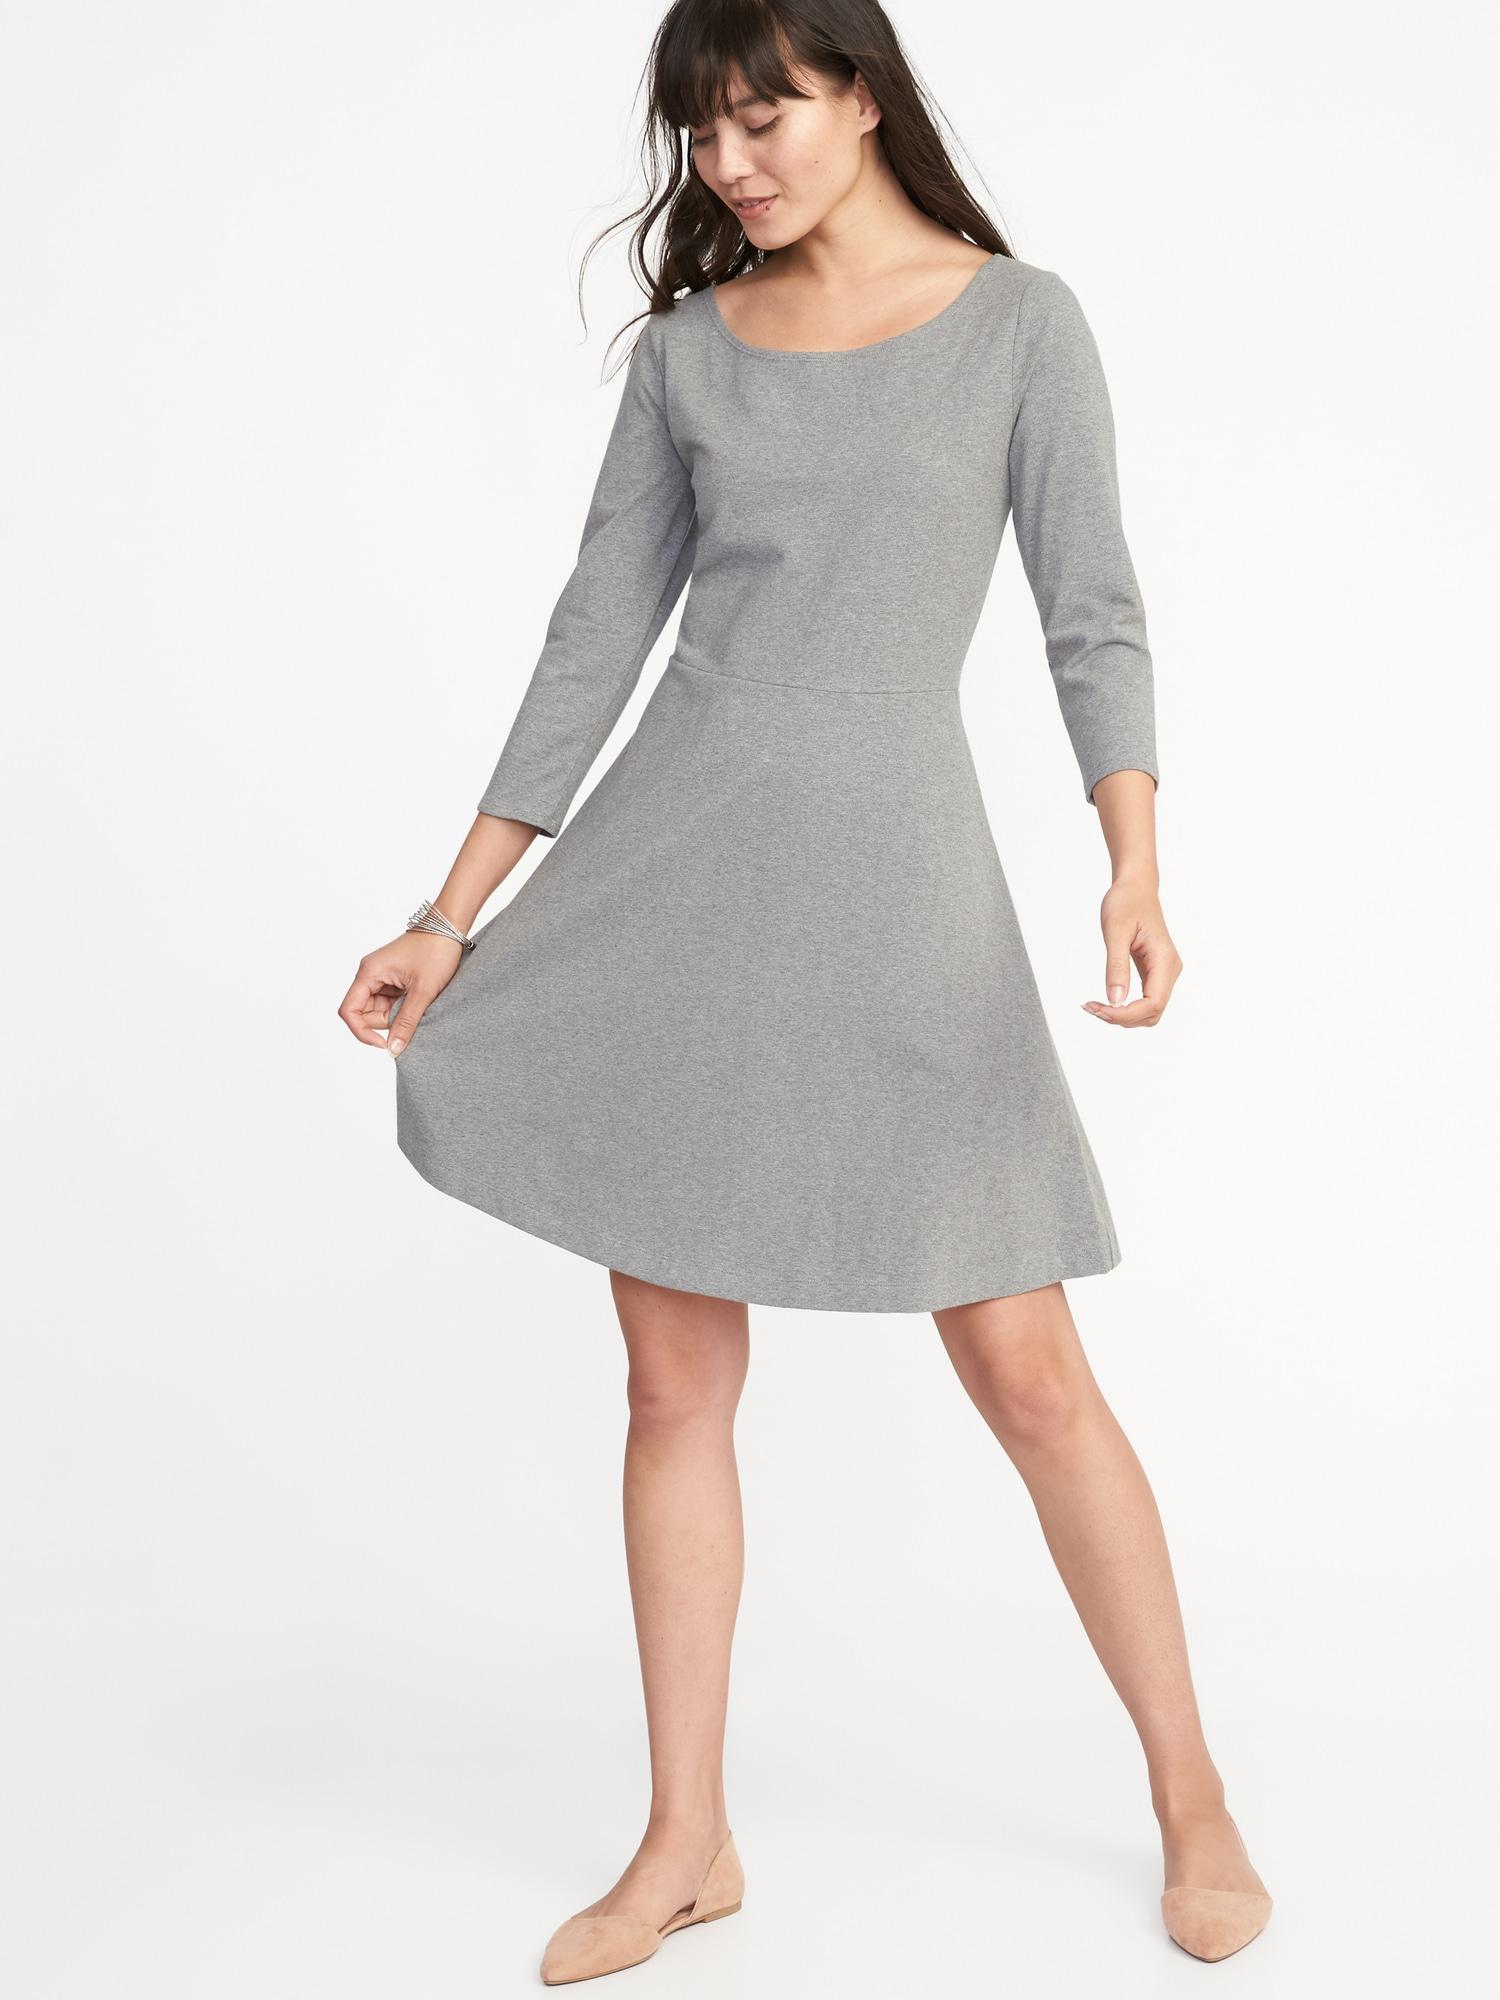 gray fit and flare dress